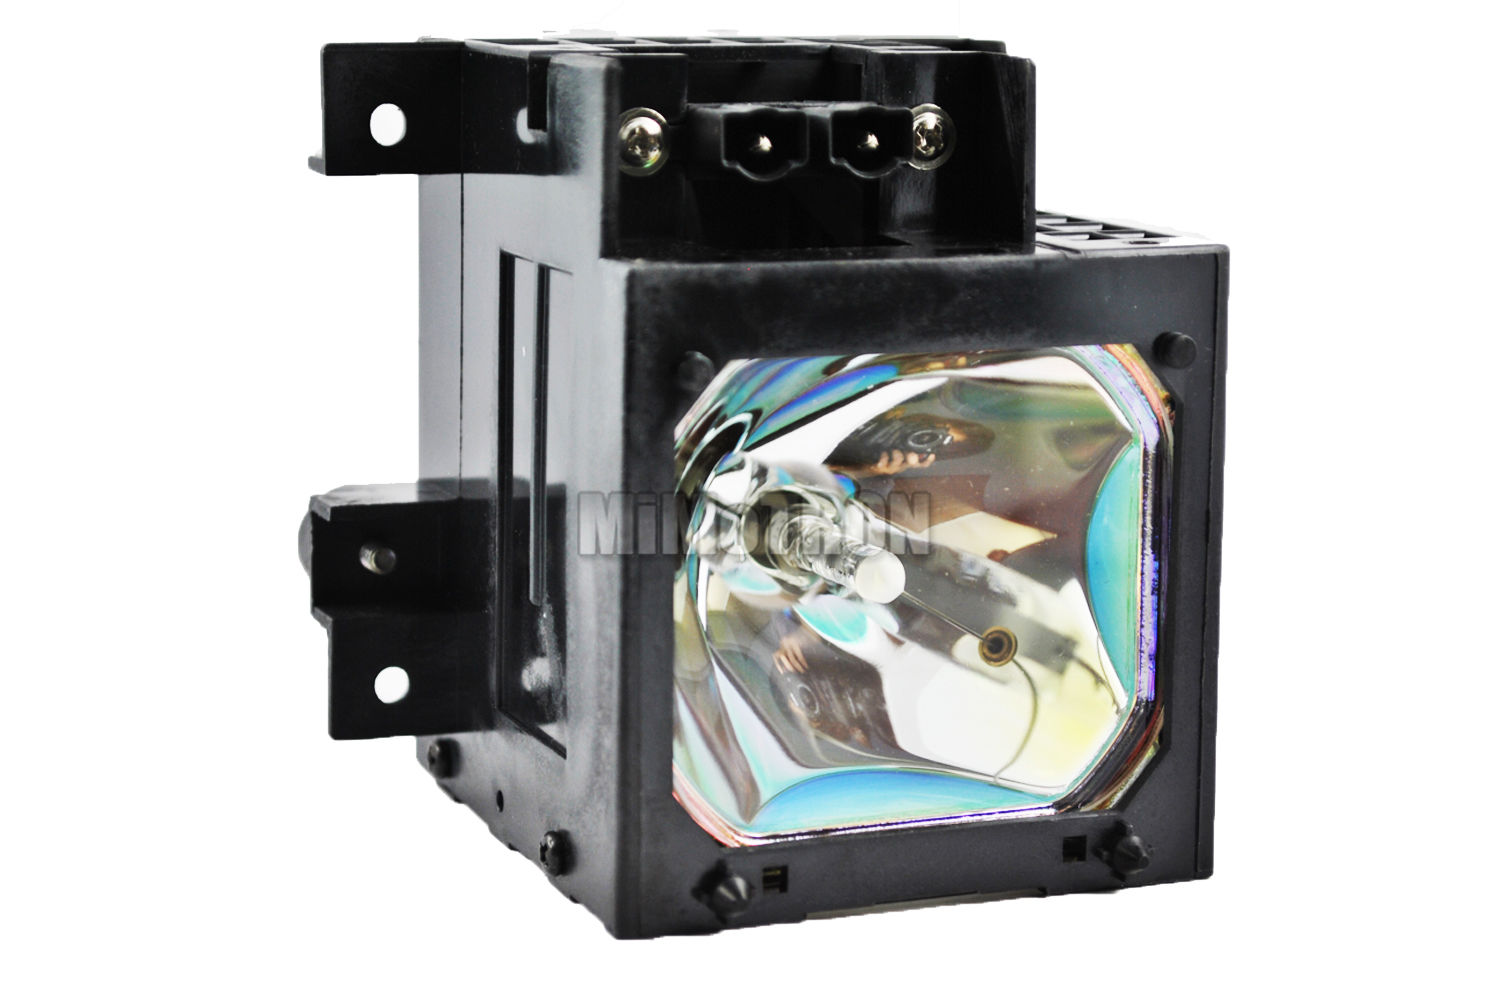 Sony kf-50we620 Replacement TV Lamp with housing